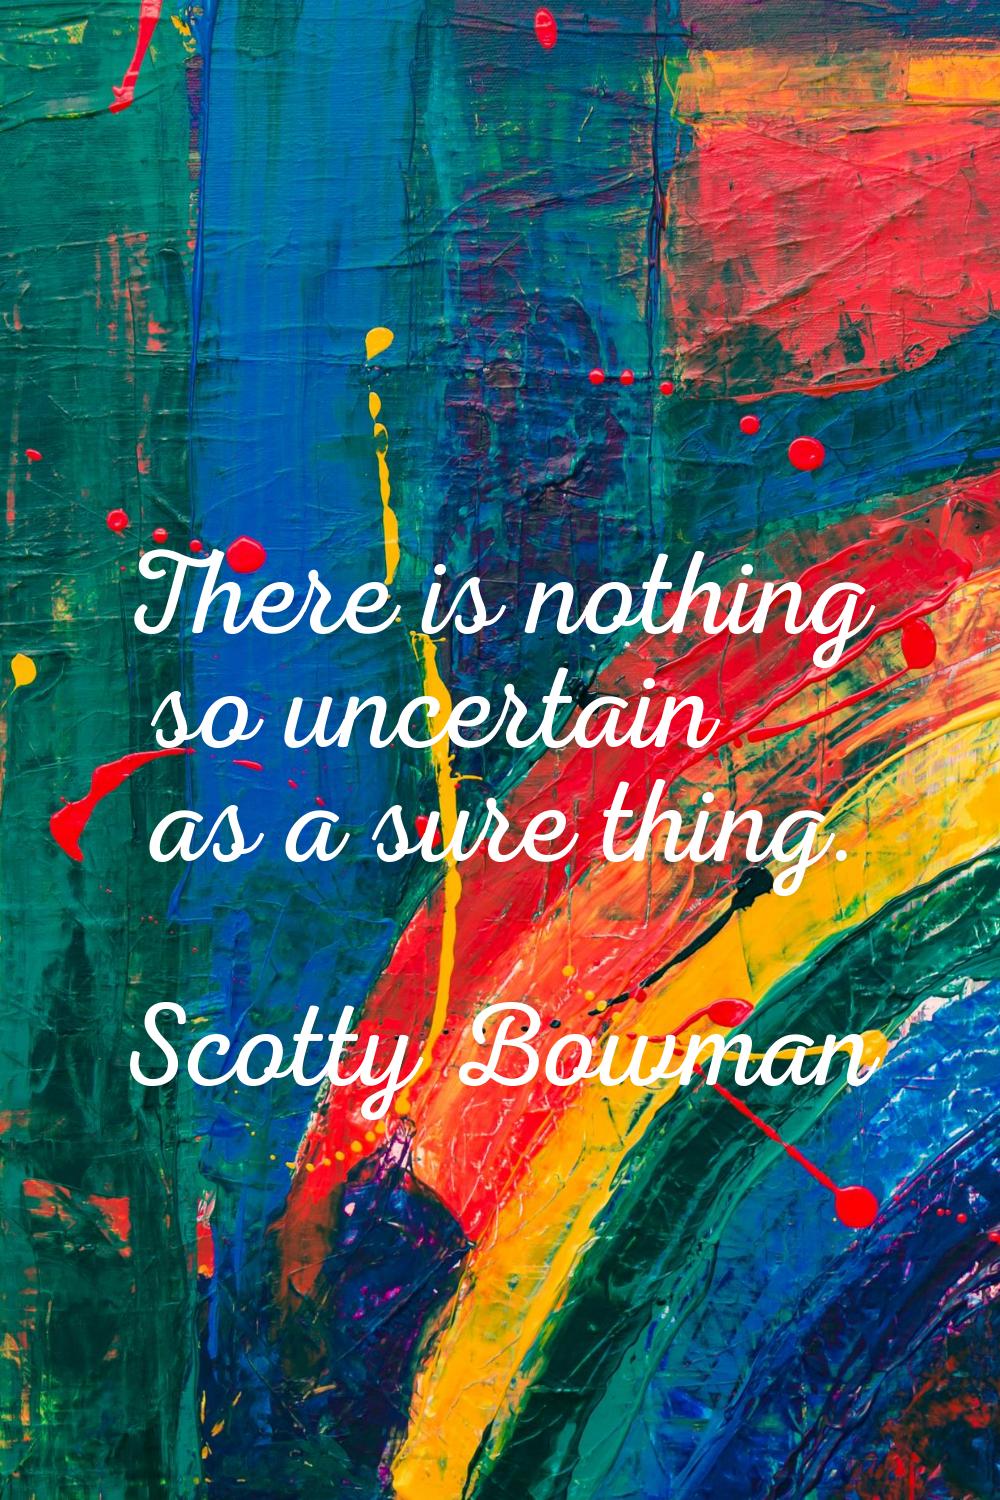 There is nothing so uncertain as a sure thing.